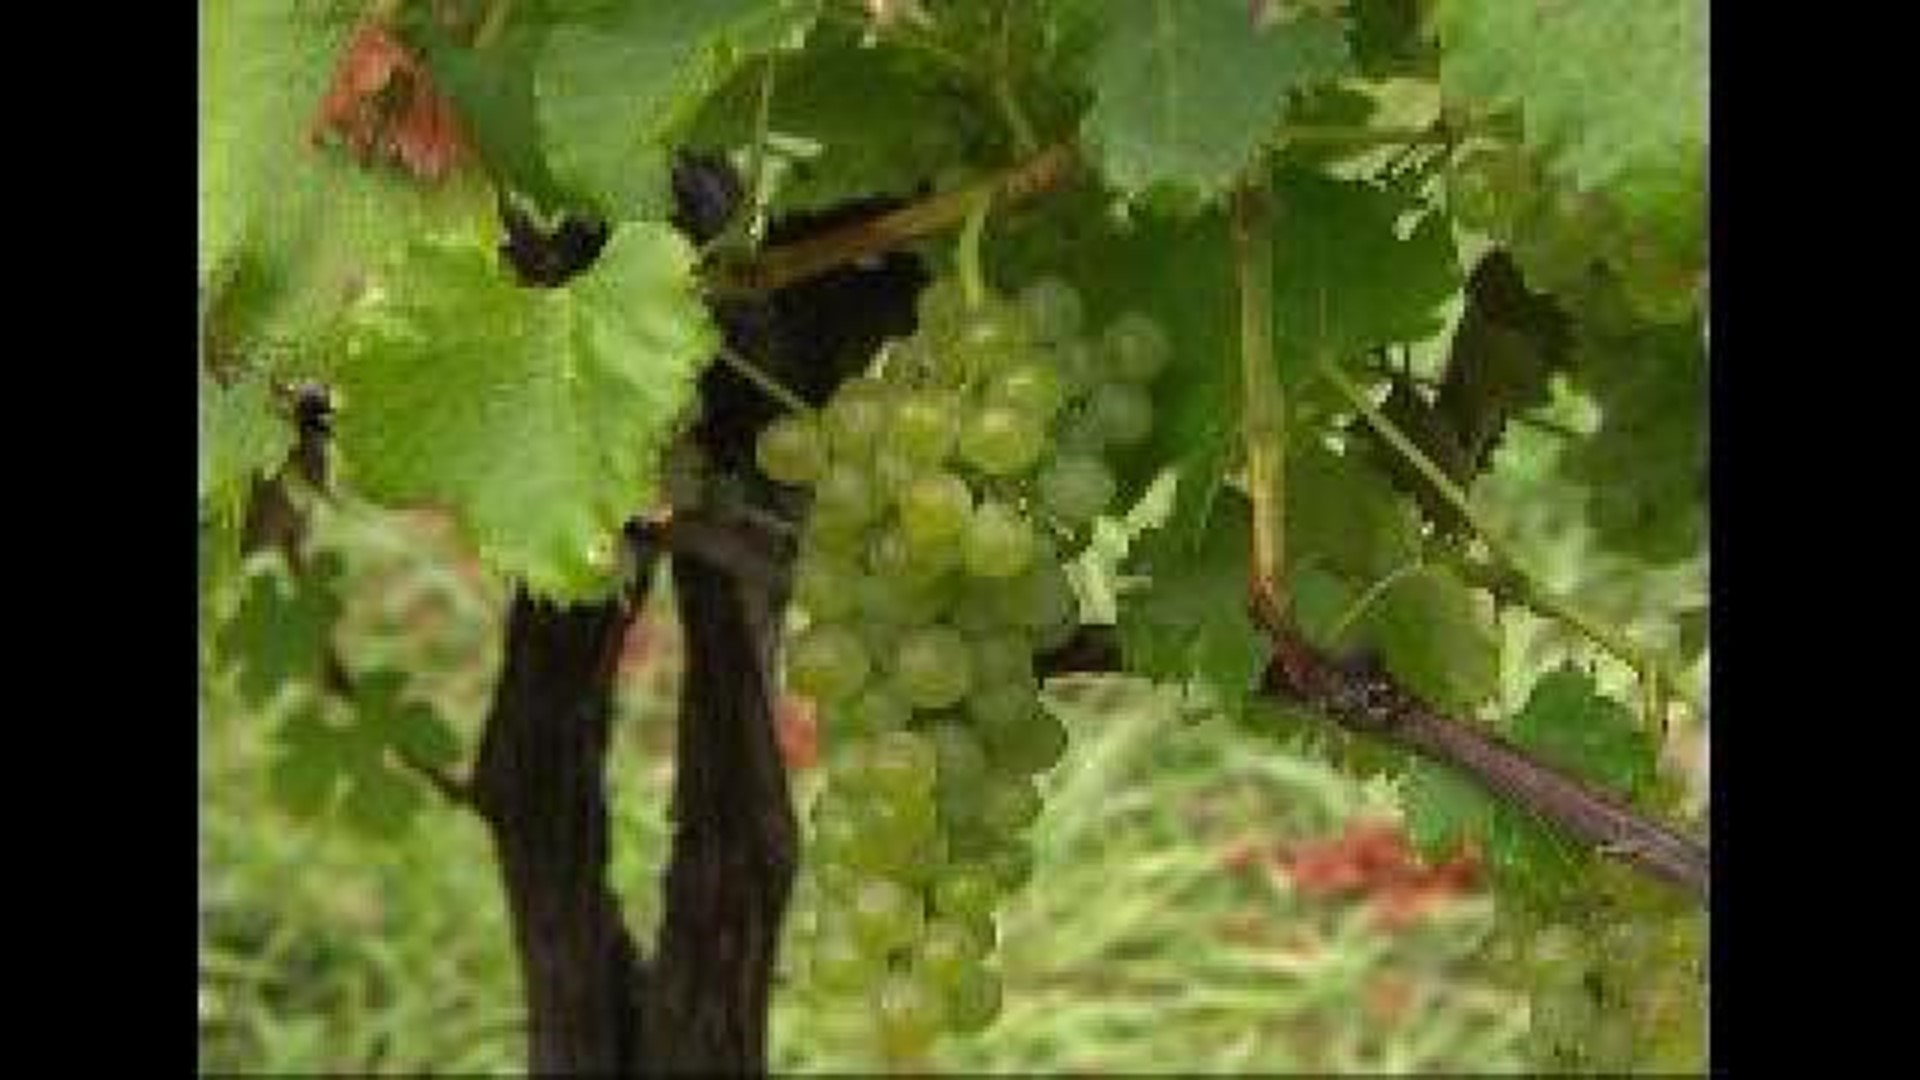 The wine industry is seeing some benefits from the drought